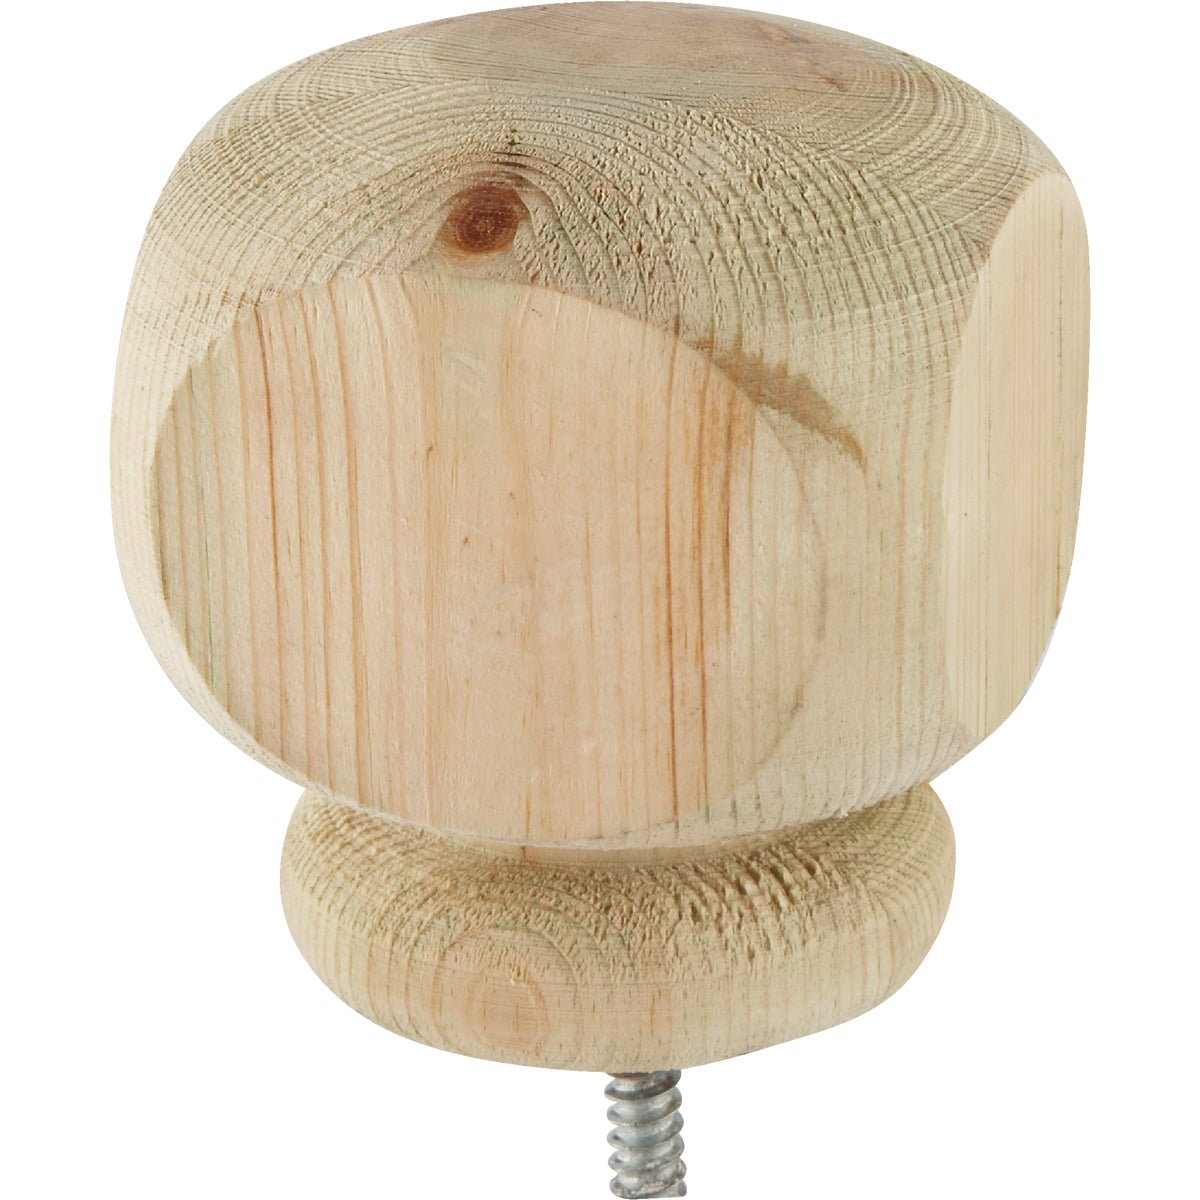 ProWood 3-1/2 In. x 3-1/2 In. Treated Wood Screw-On Contemporary Post Cap